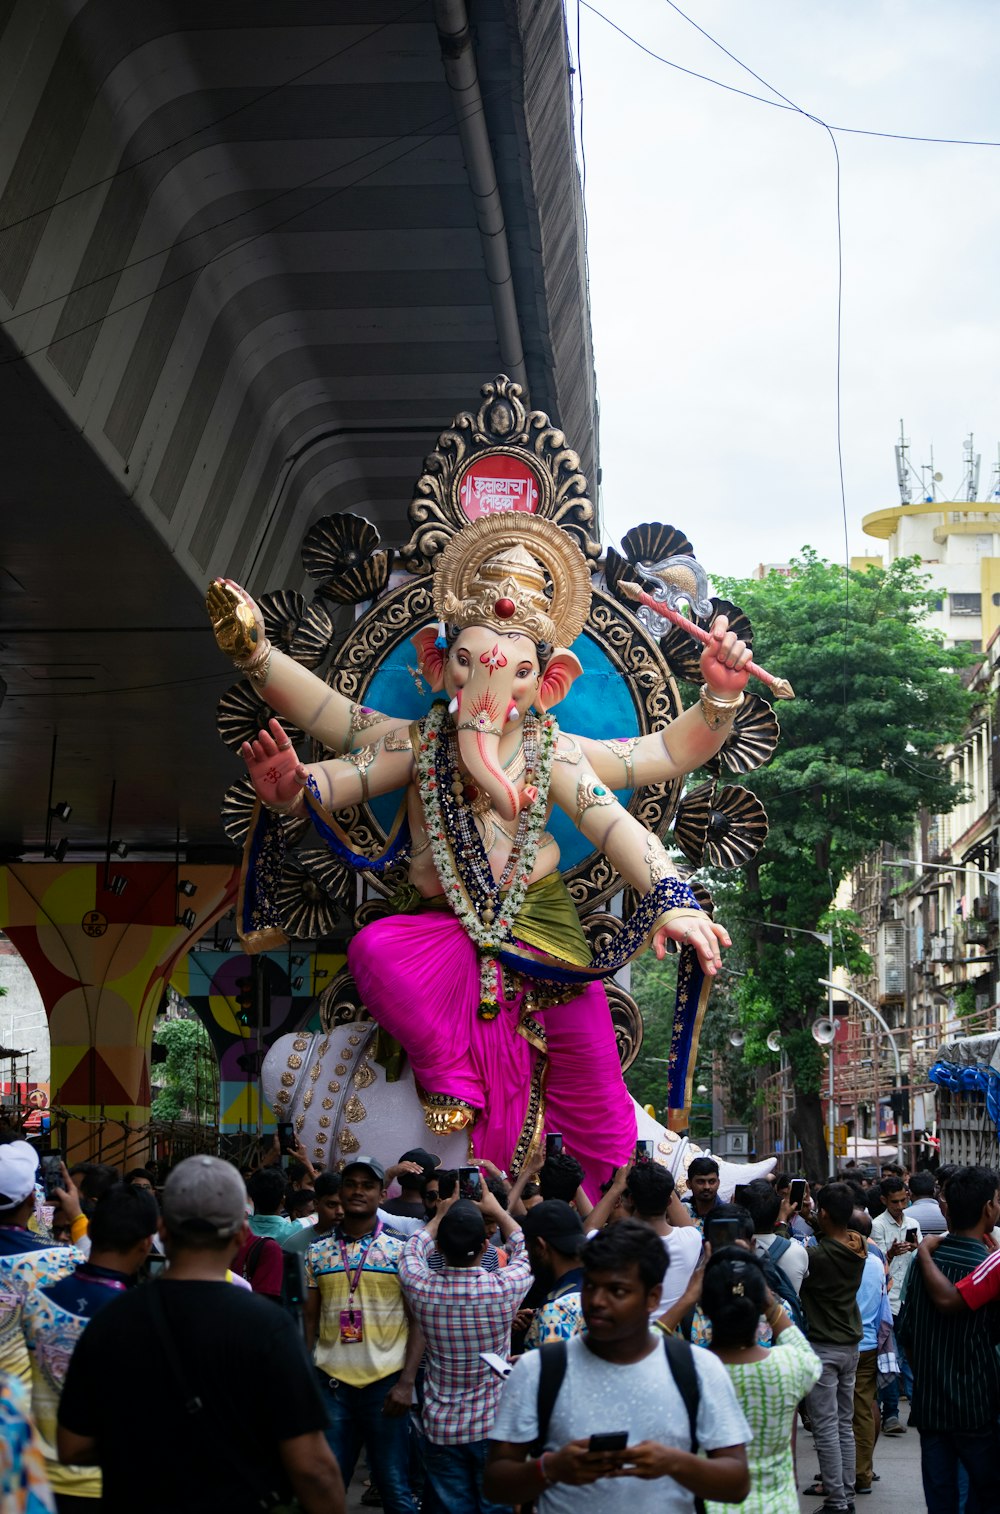 a large statue of a god on a city street